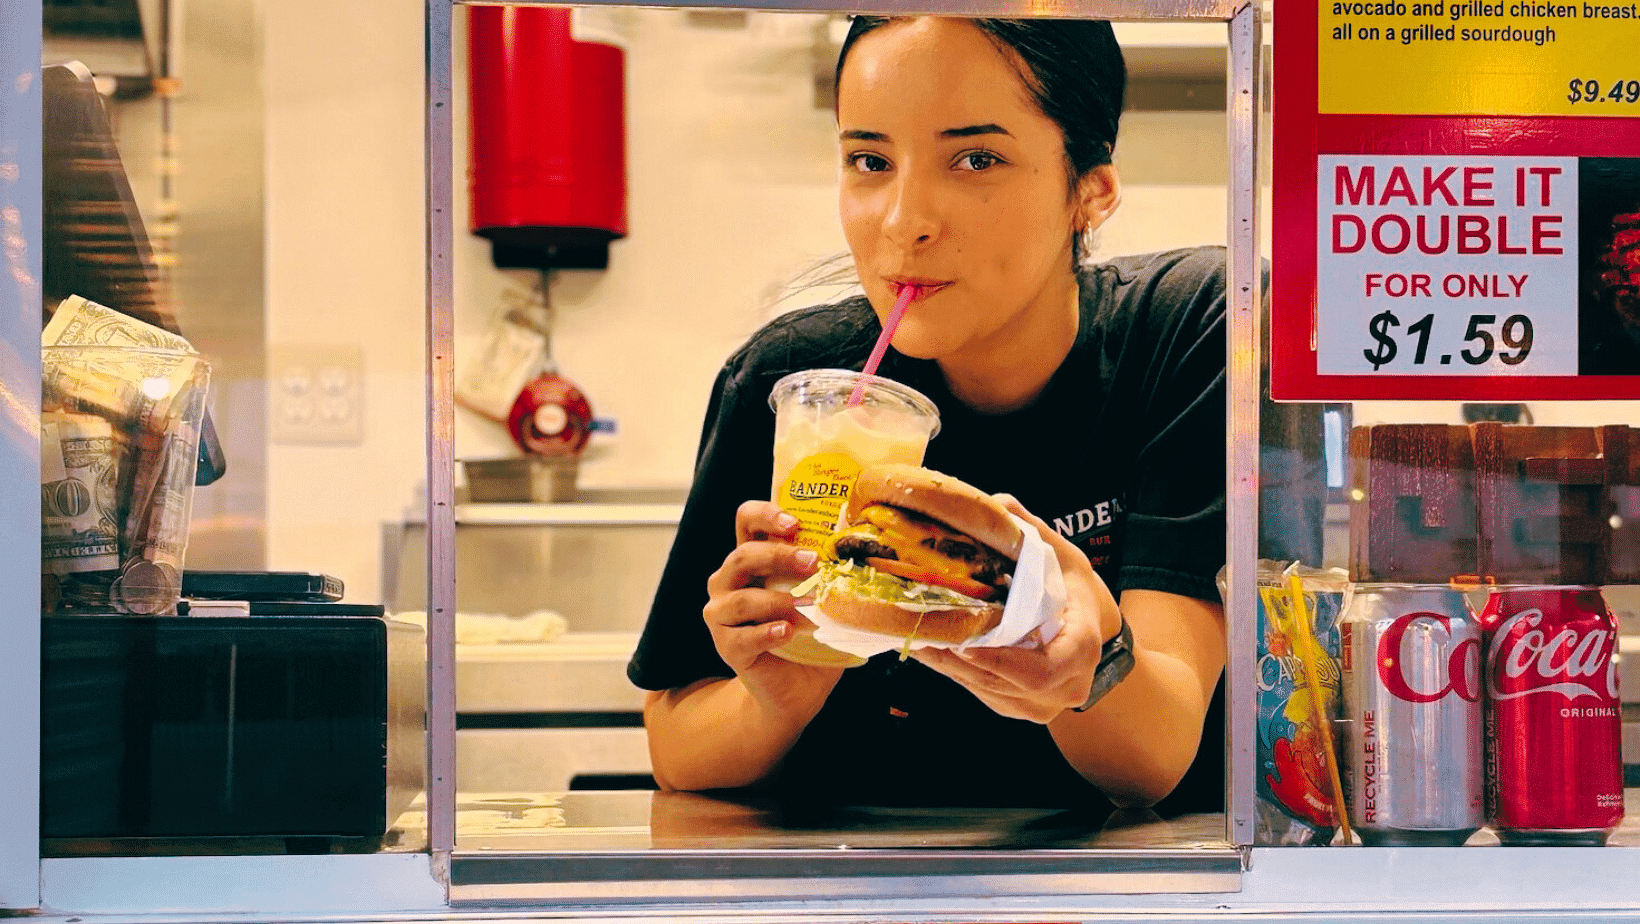 Woman sipping a drink with a burger ad behind her at a food stand.